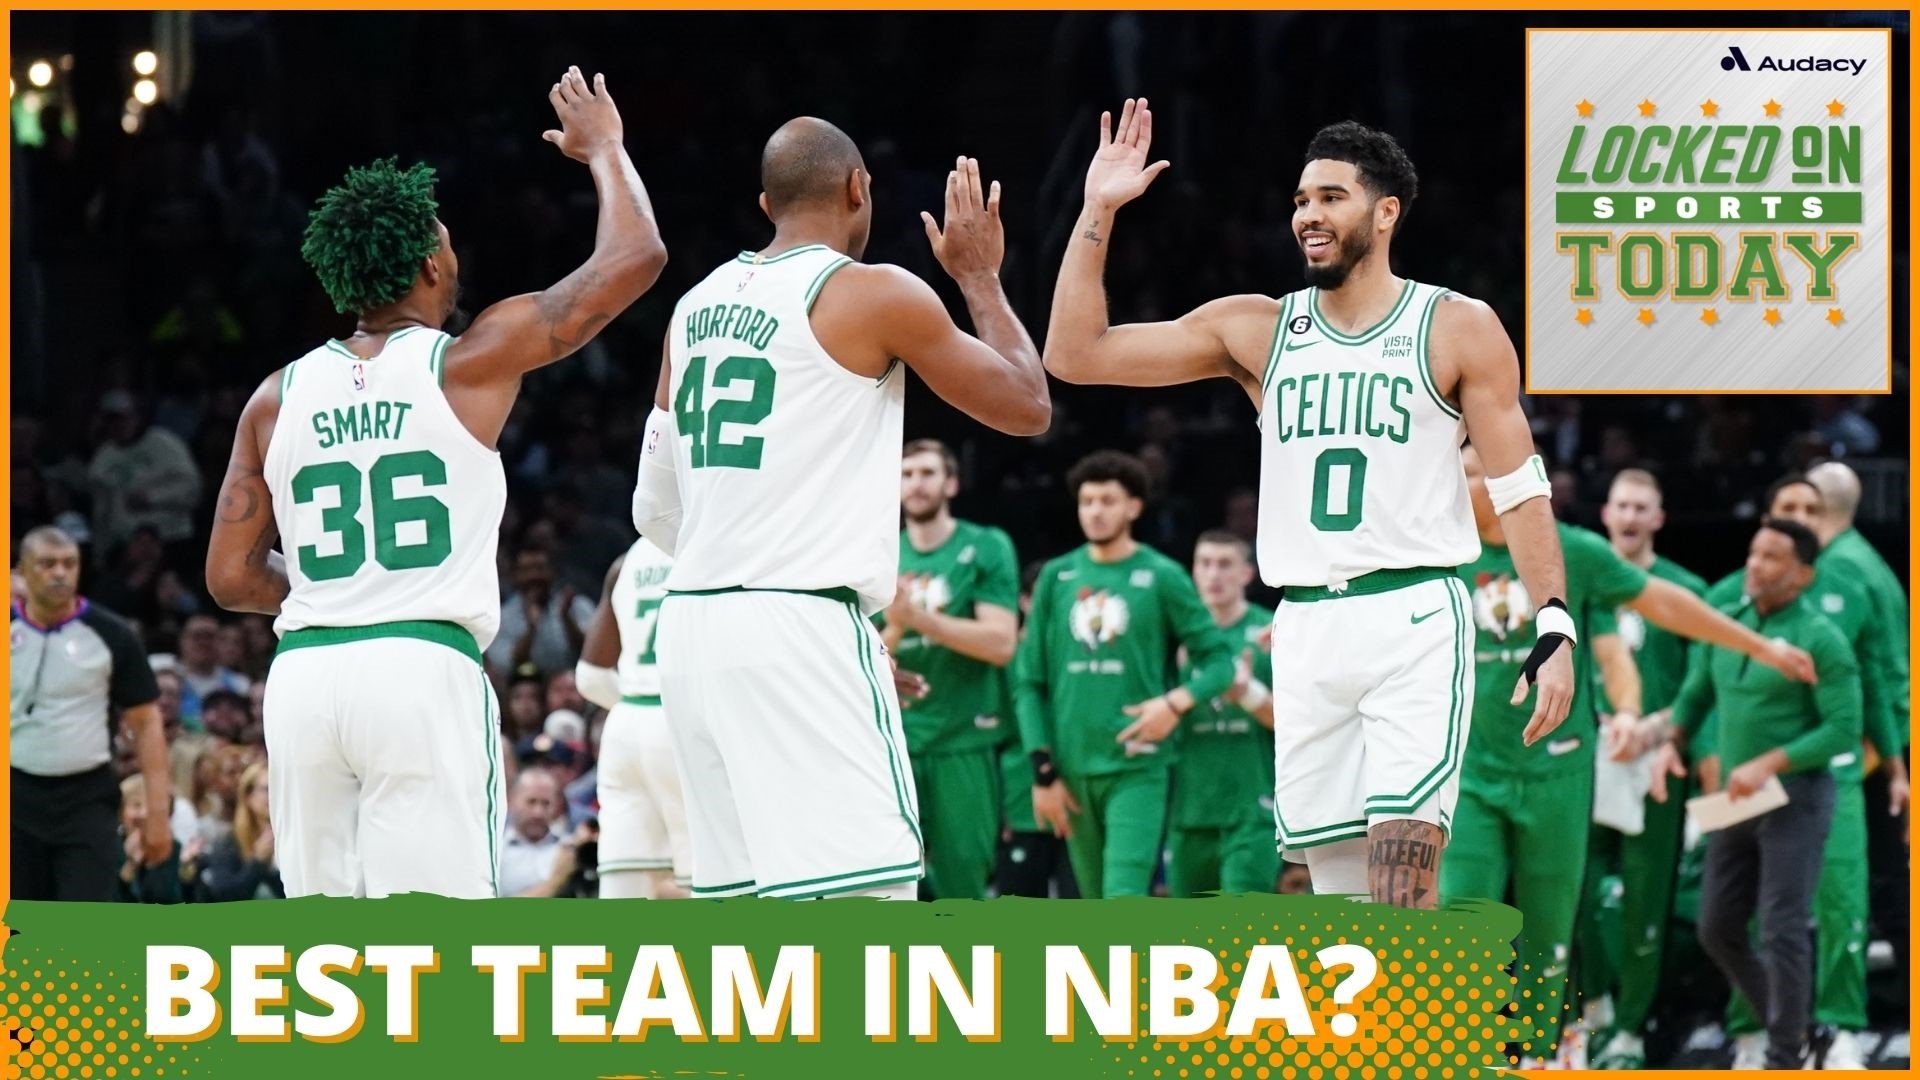 Discussing the day's top sports stories from why the Boston Celtics are the best team in basketball to the Tennessee Titans facing their toughest test of the season.